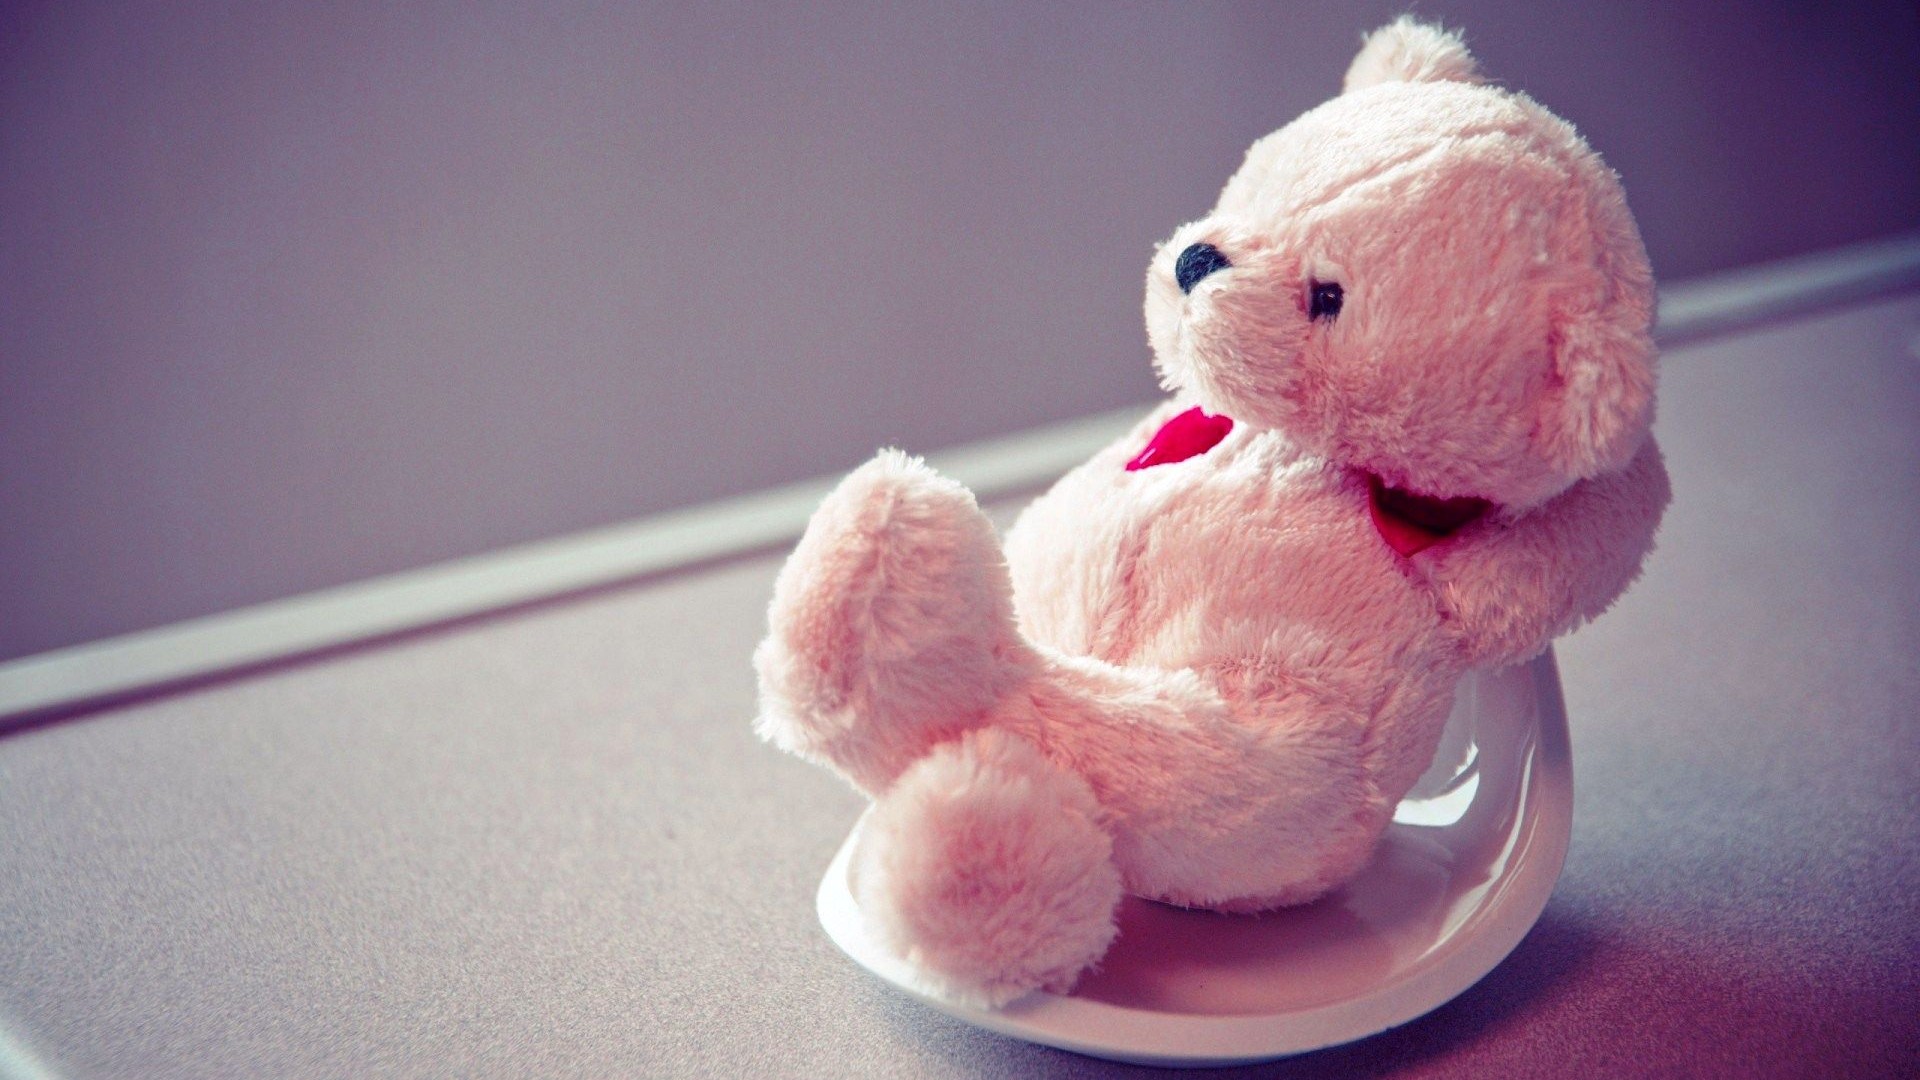 HD Cute Teddy Bear Backgrounds with image resolution 1920x1080 pixel. You can use this wallpaper as background for your desktop Computer Screensavers, Android or iPhone smartphones